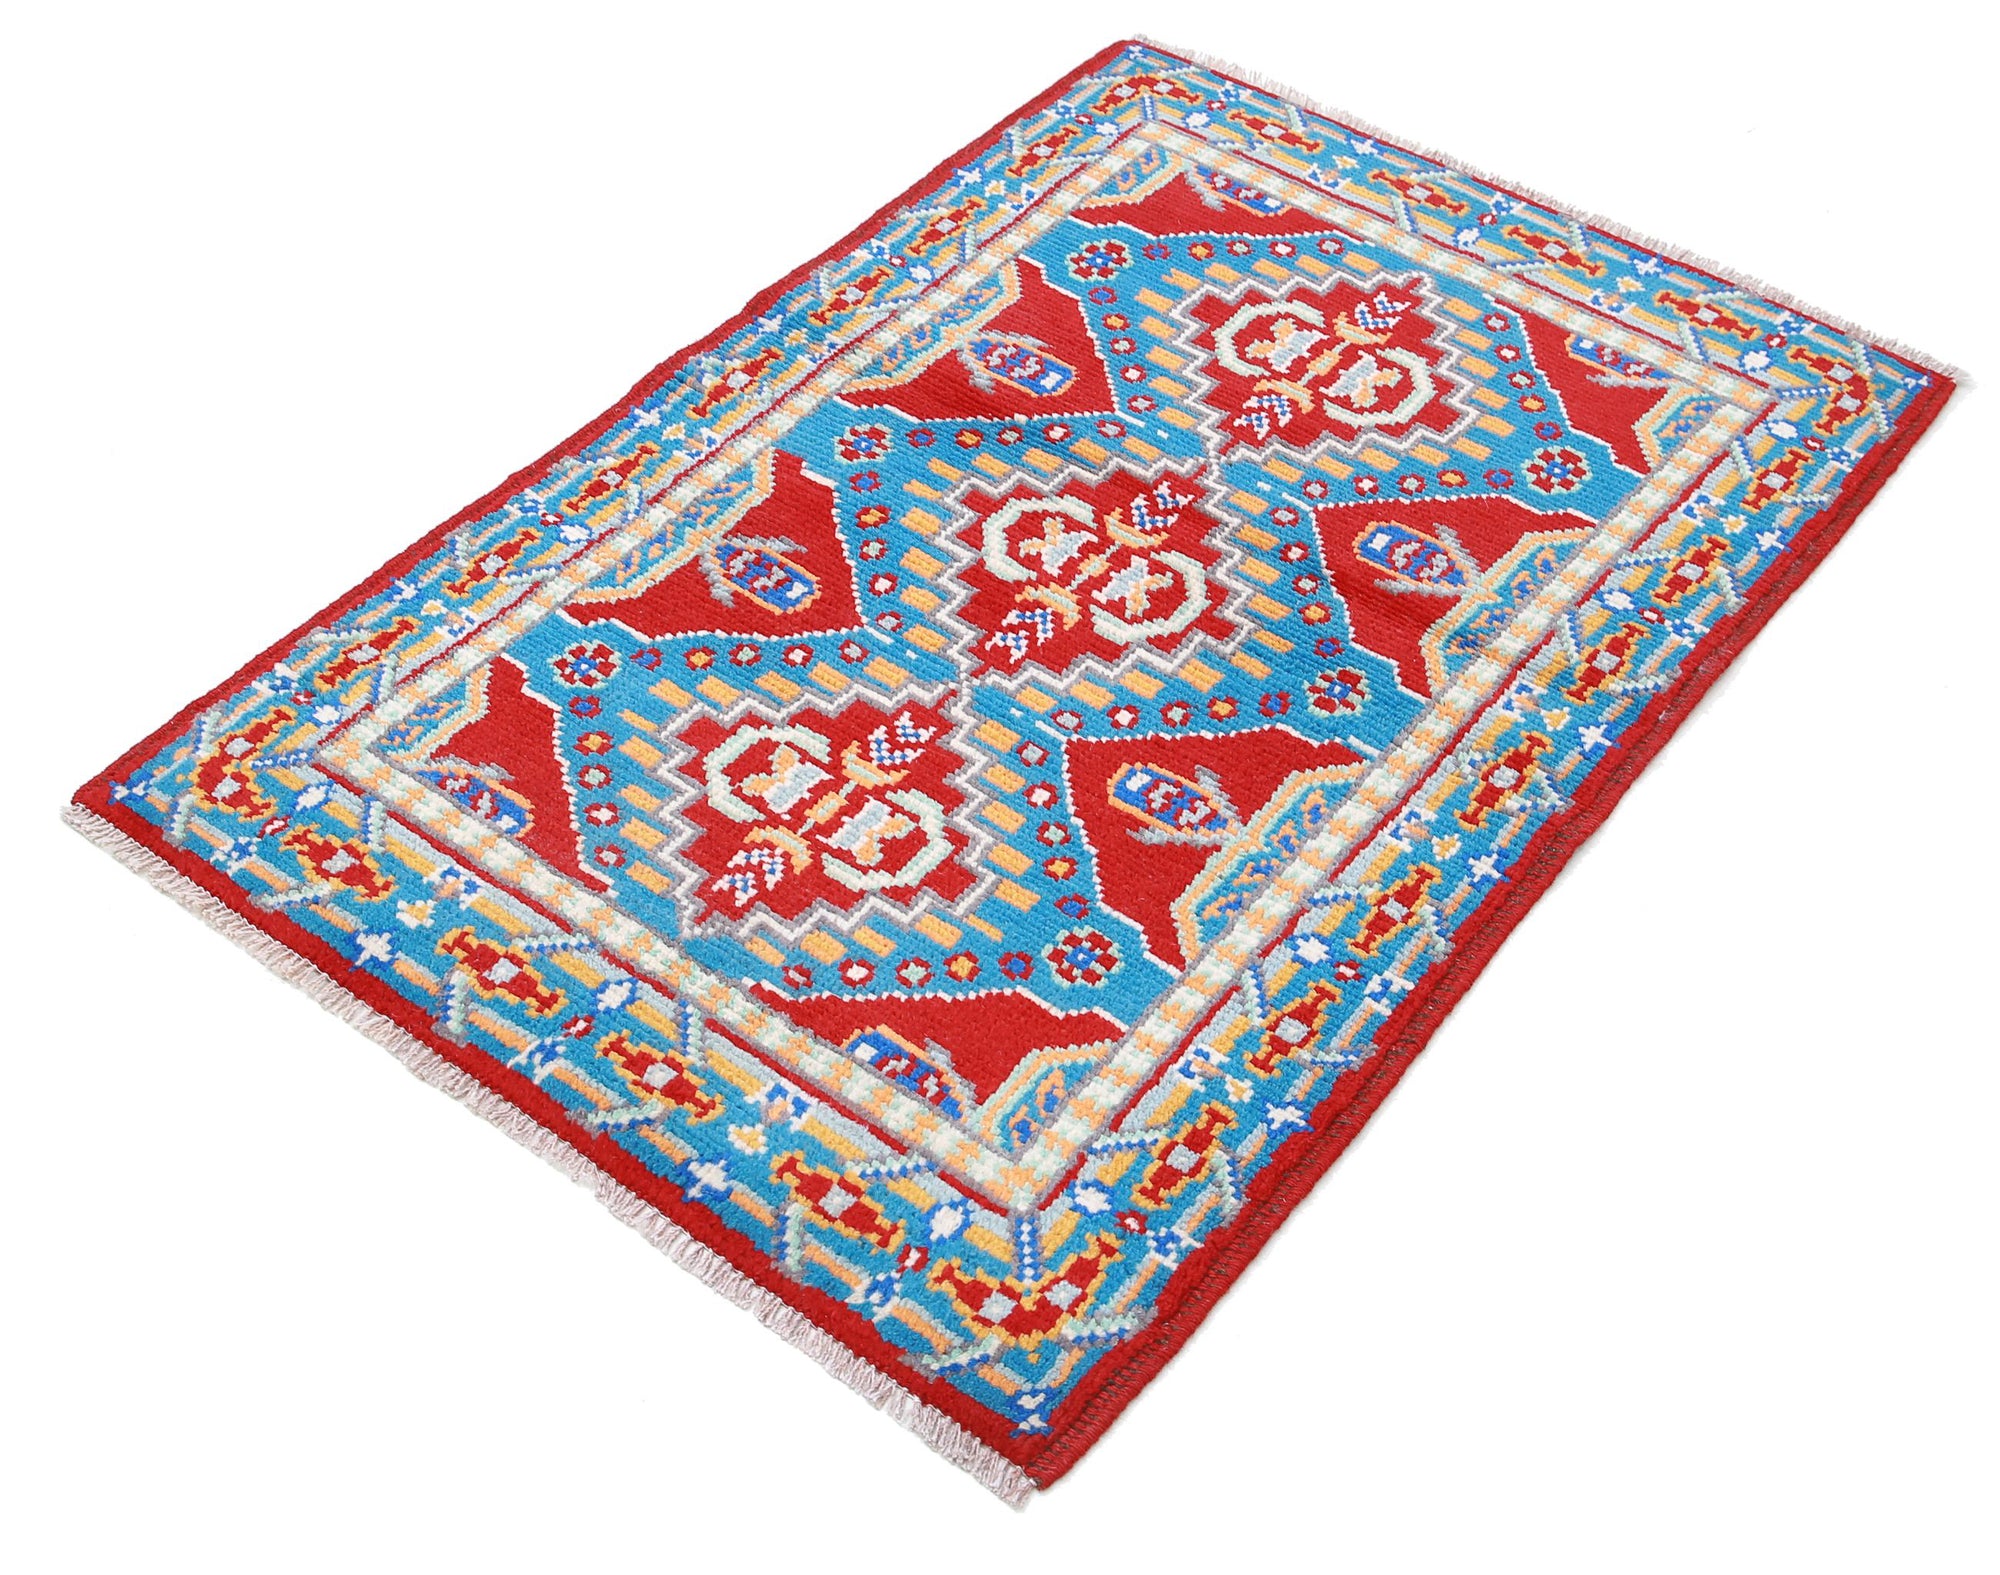 Revival-hand-knotted-qarghani-wool-rug-5014194-2.jpg